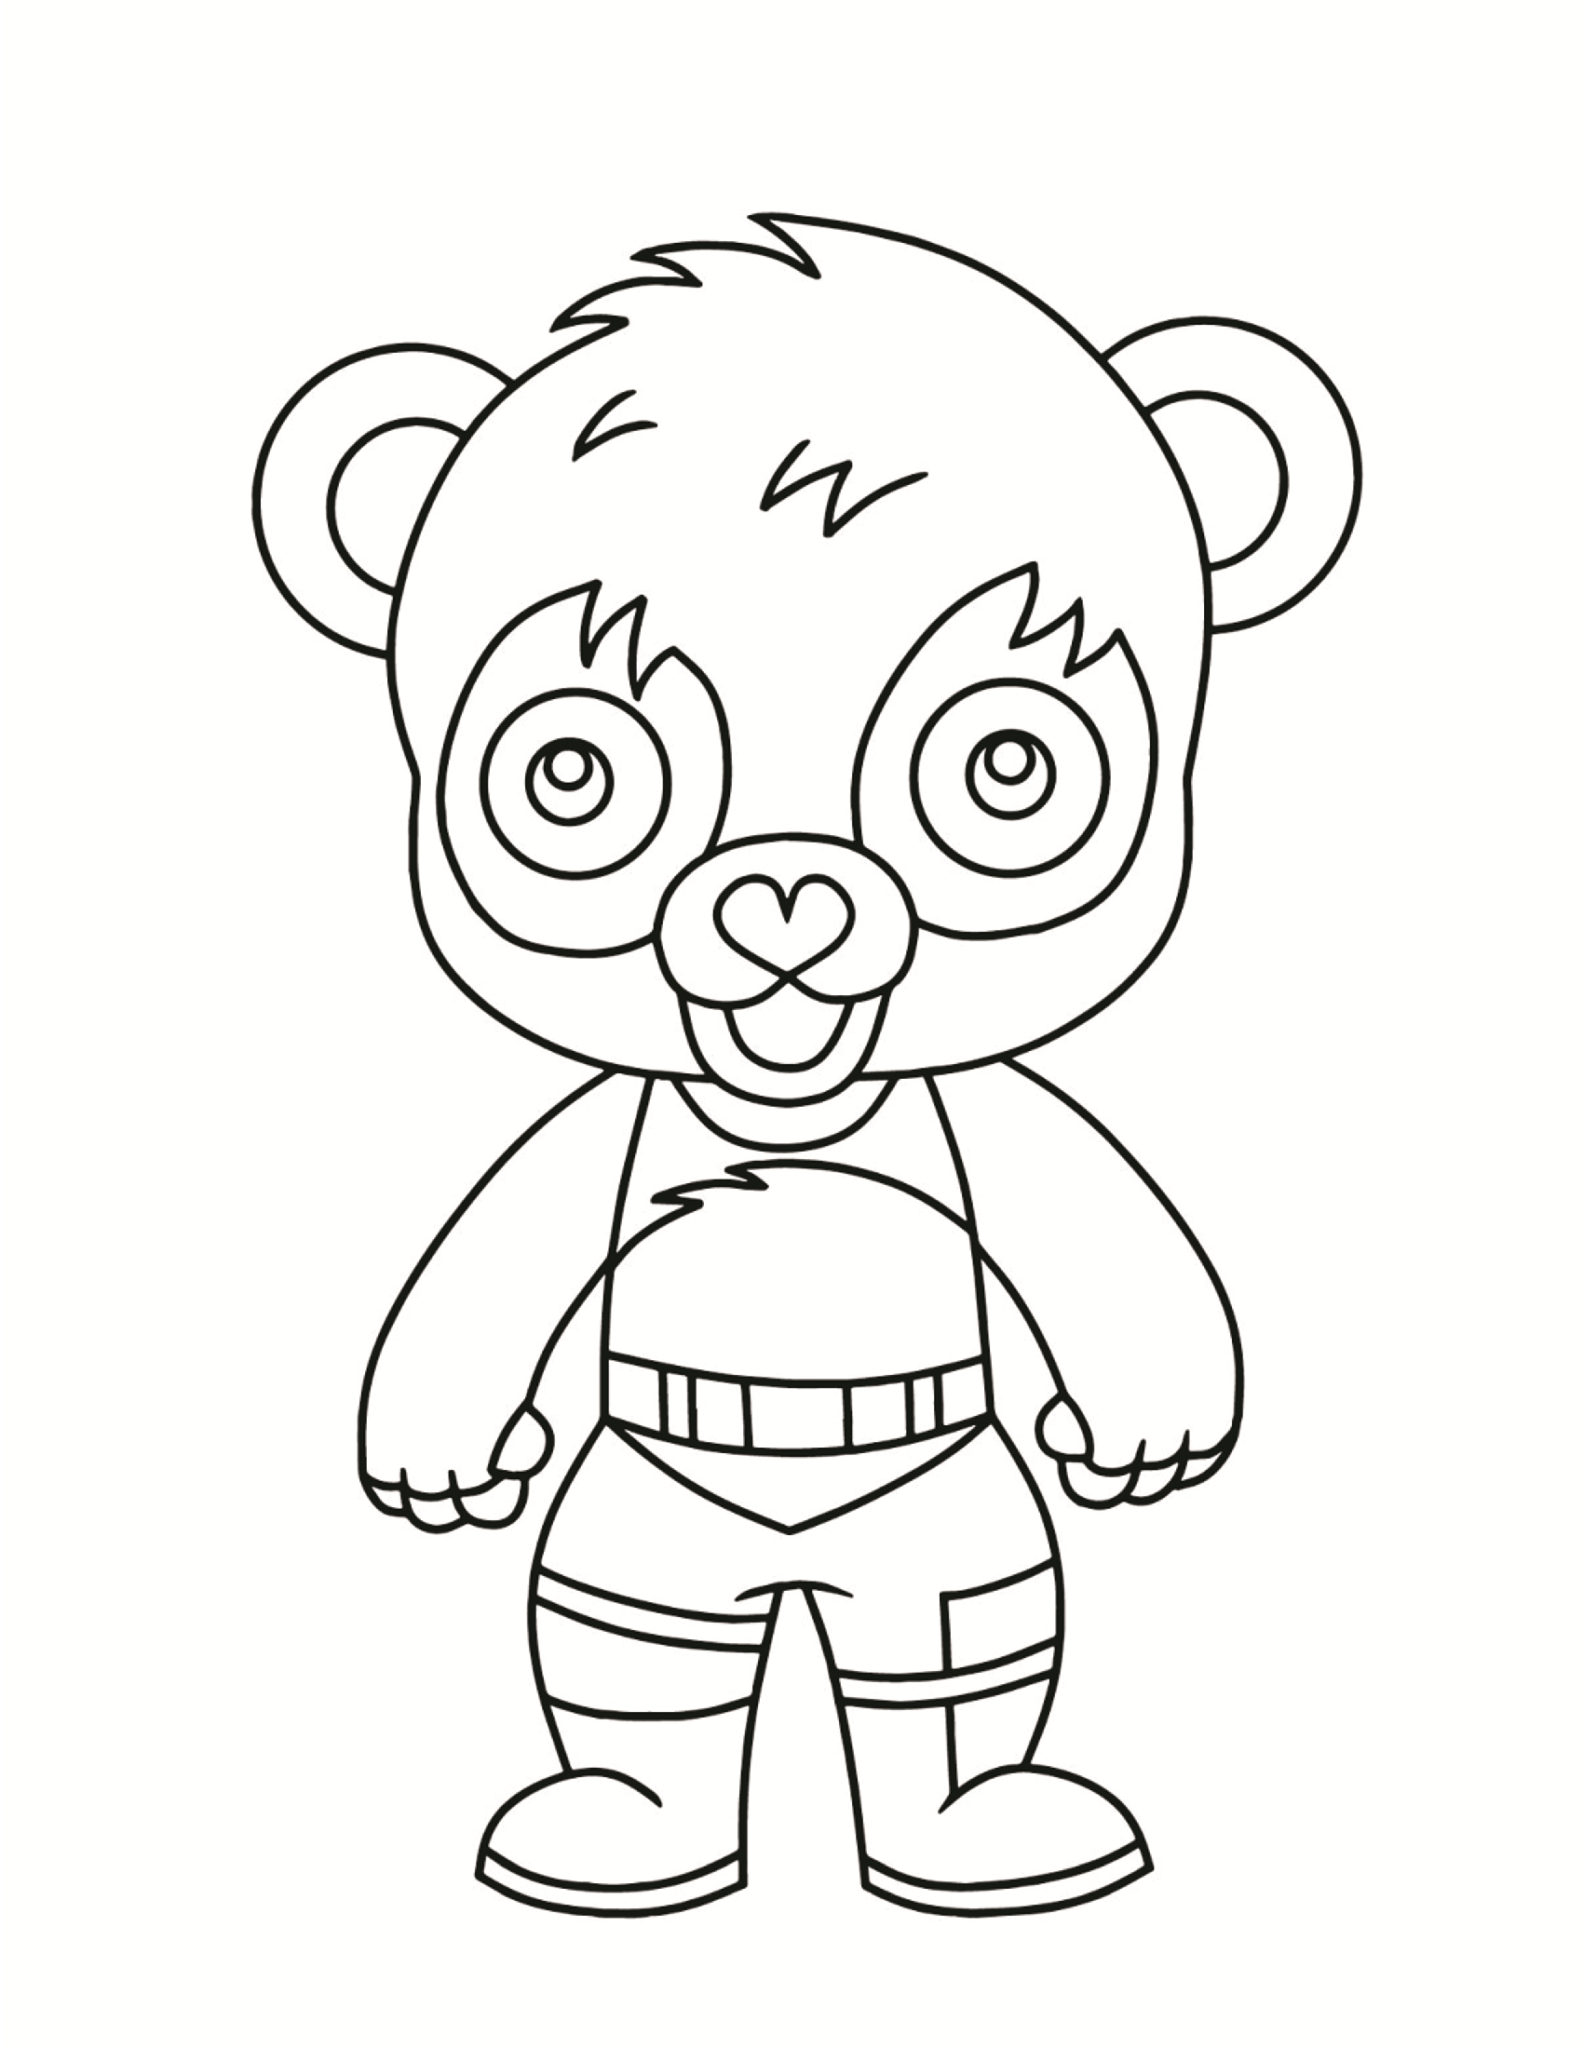 chibi animals coloring pages